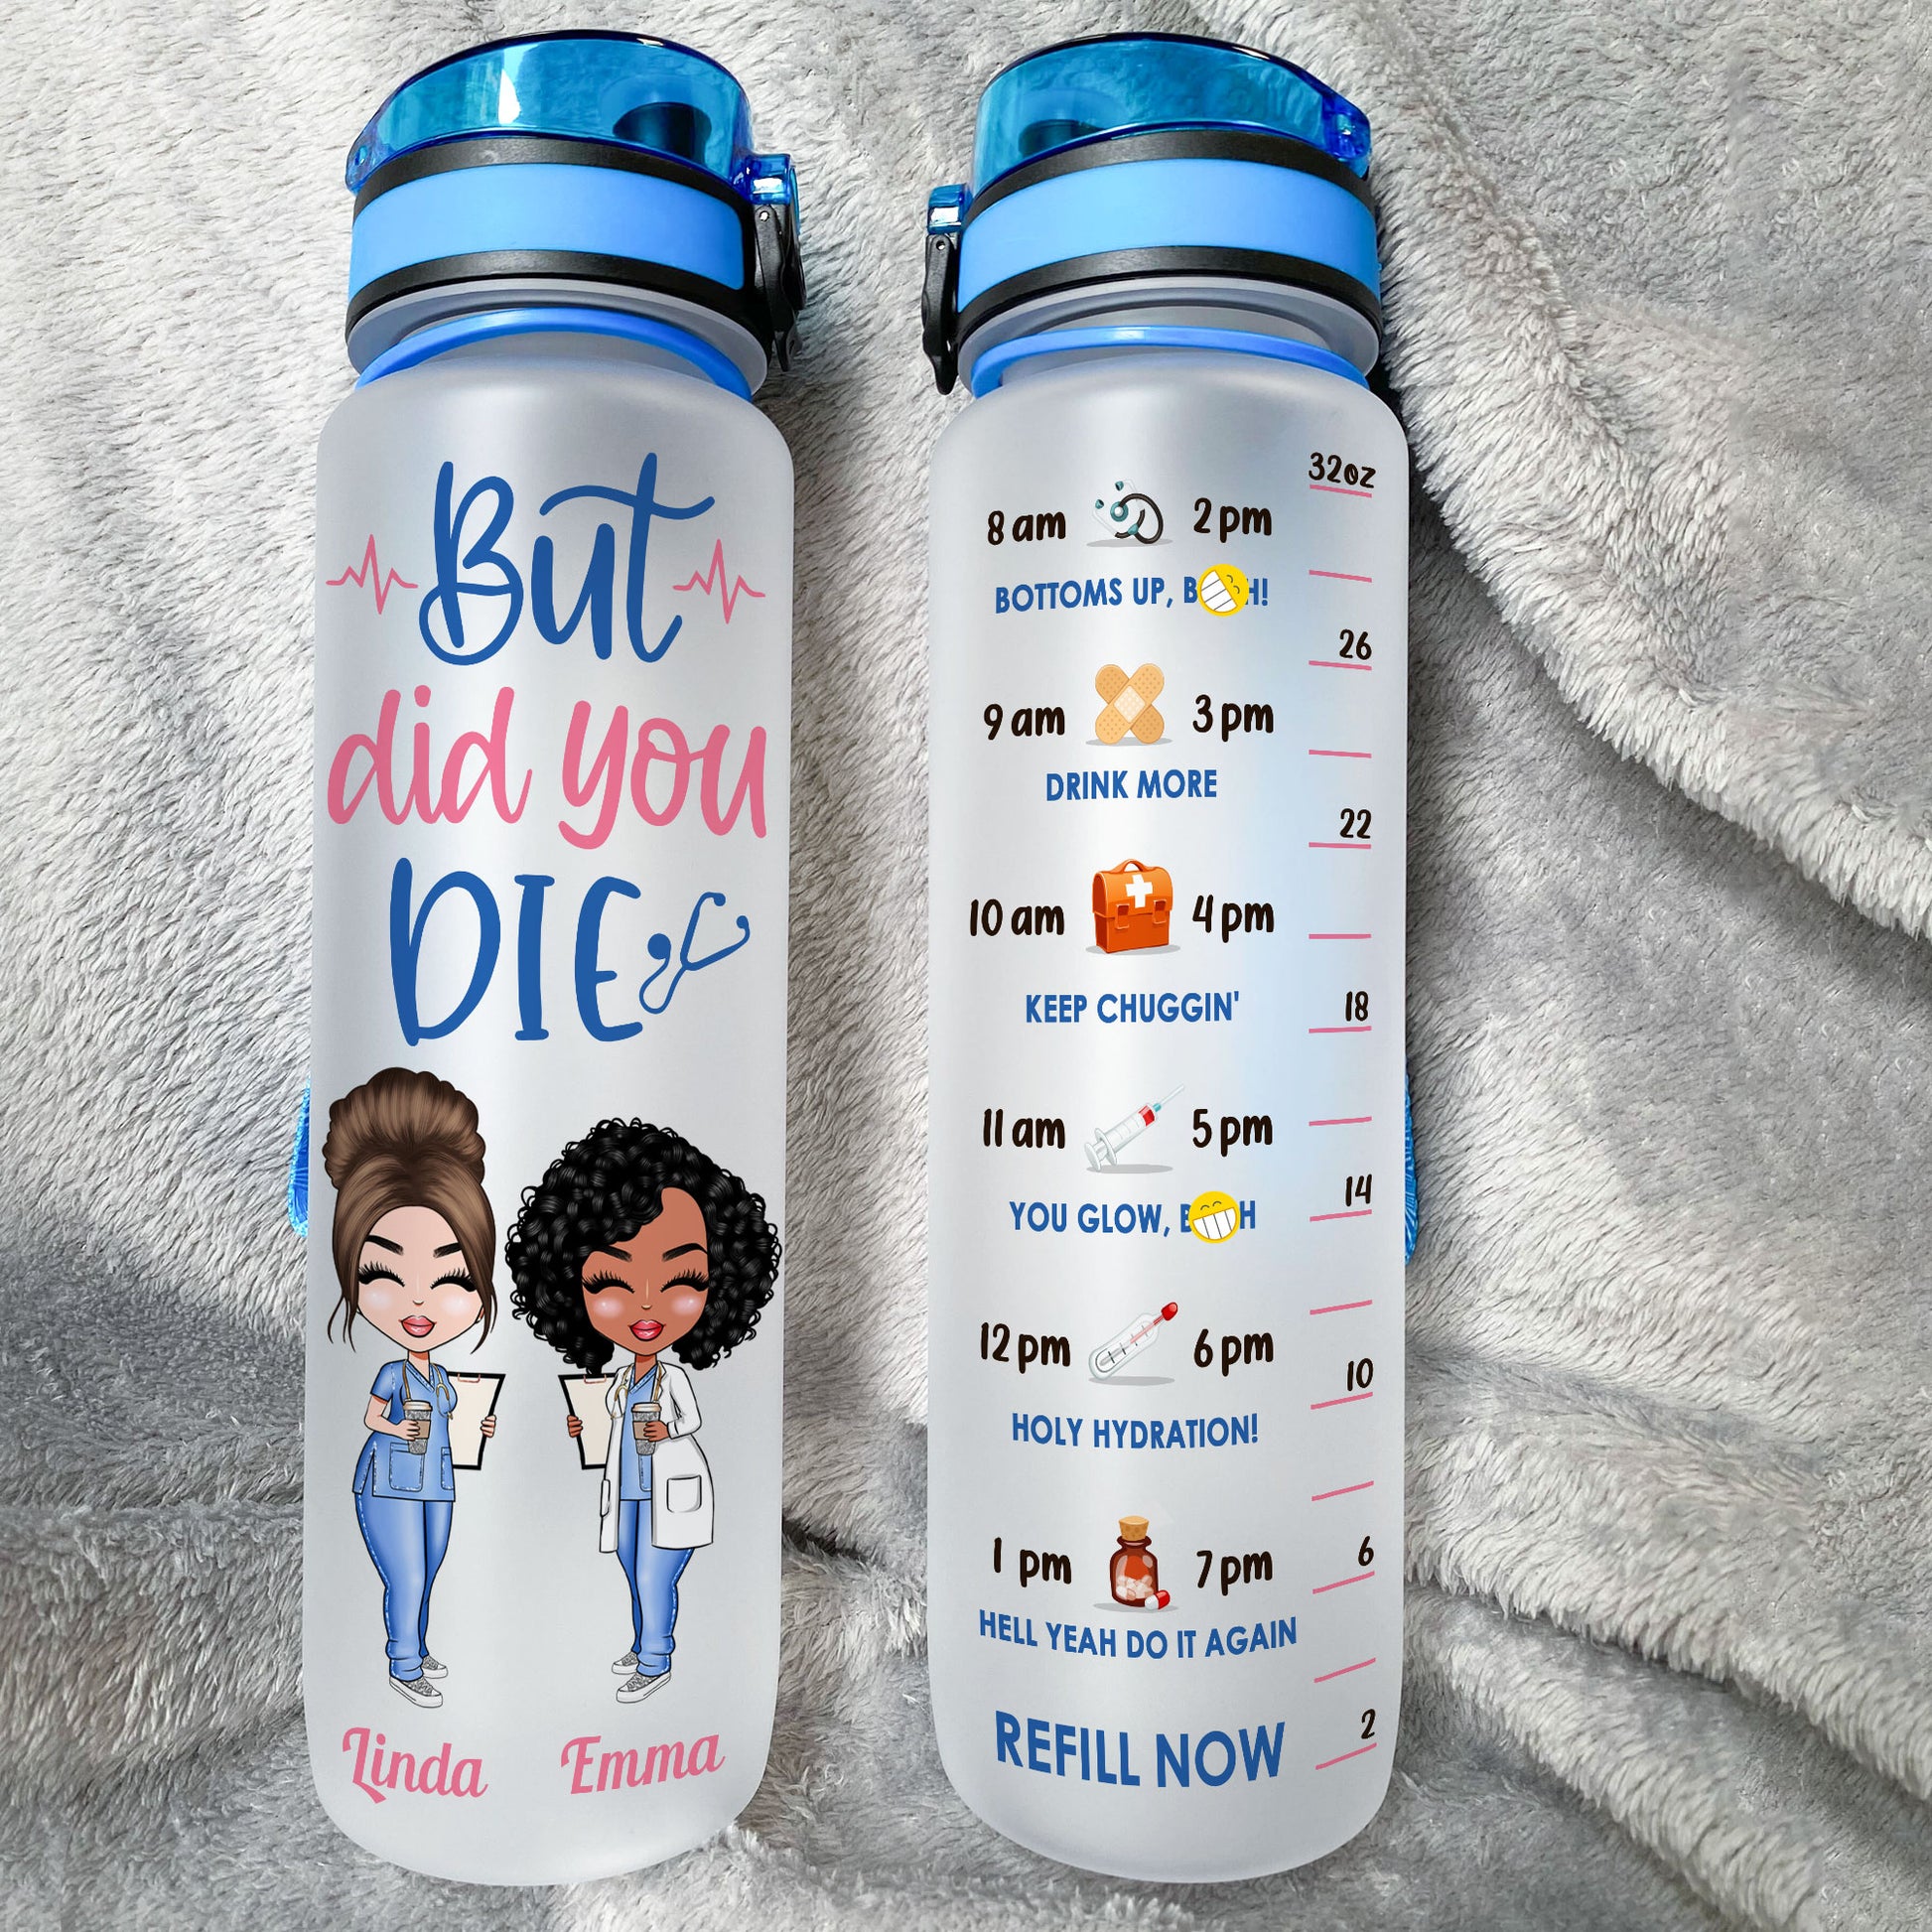 Personalized Water Tracker Bottle - Gift For Nurse - Safety First Drin -  newsvips